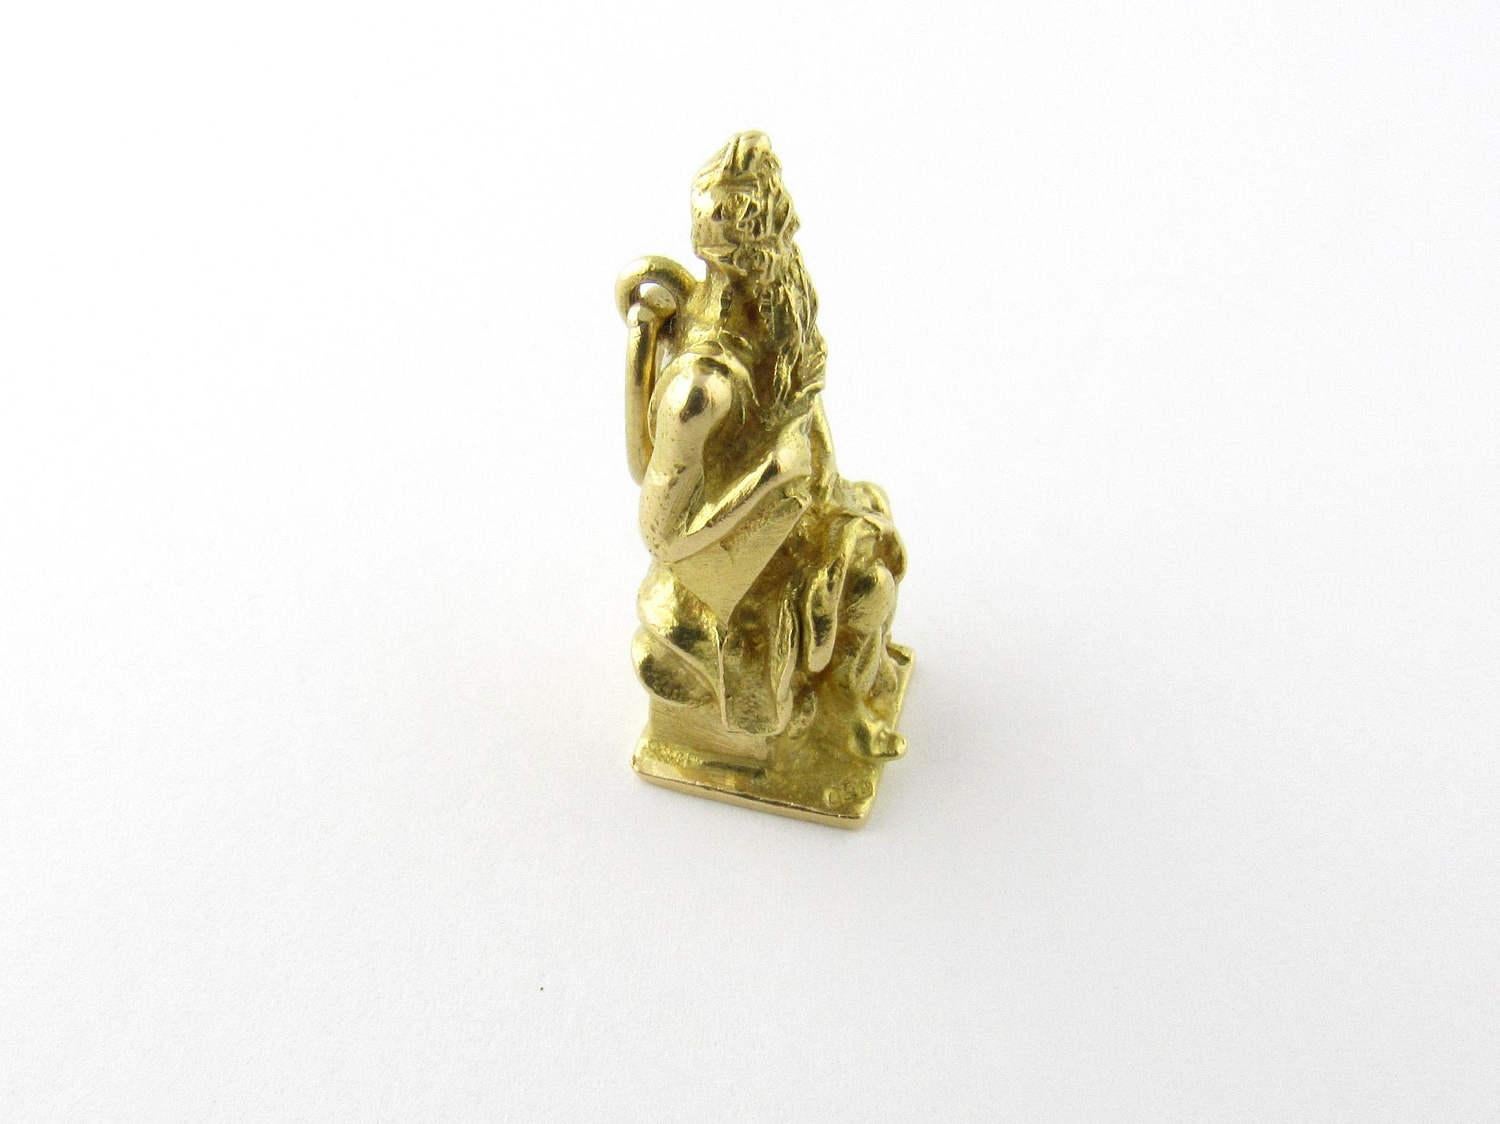 Vintage 14 Karat Yellow Gold Moses Charm

Moses is an important prophet in a number of faiths. According to the Hebrew Bible, God handed down The Ten Commandments to Moses at Mount Sinai.

This 3D very detailed charm depicts a bearded Moses seated